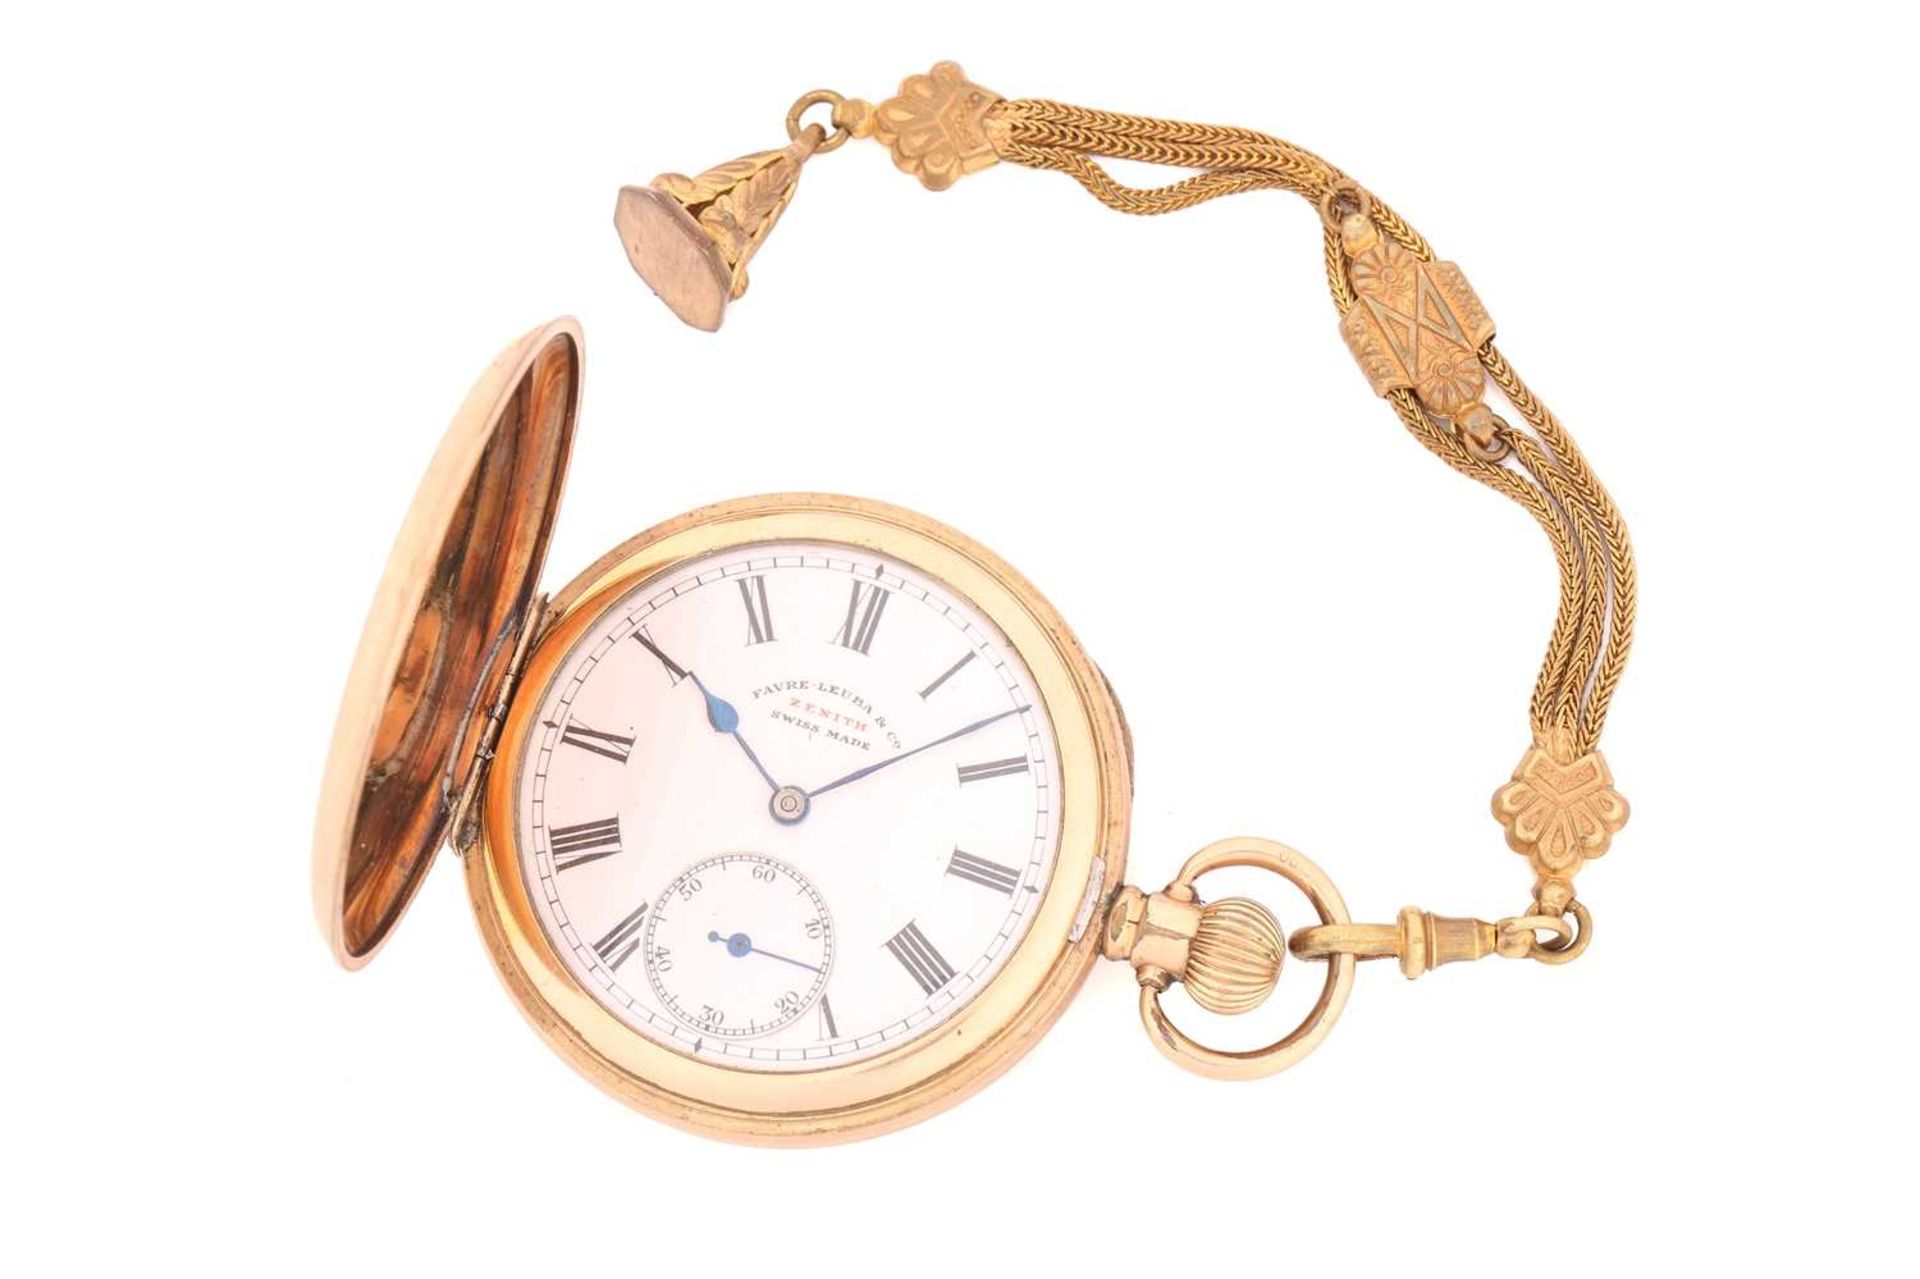 Fauve-Lauba Zenith full hunter pocket watch, the white enamel dial with roman numerals and sub-